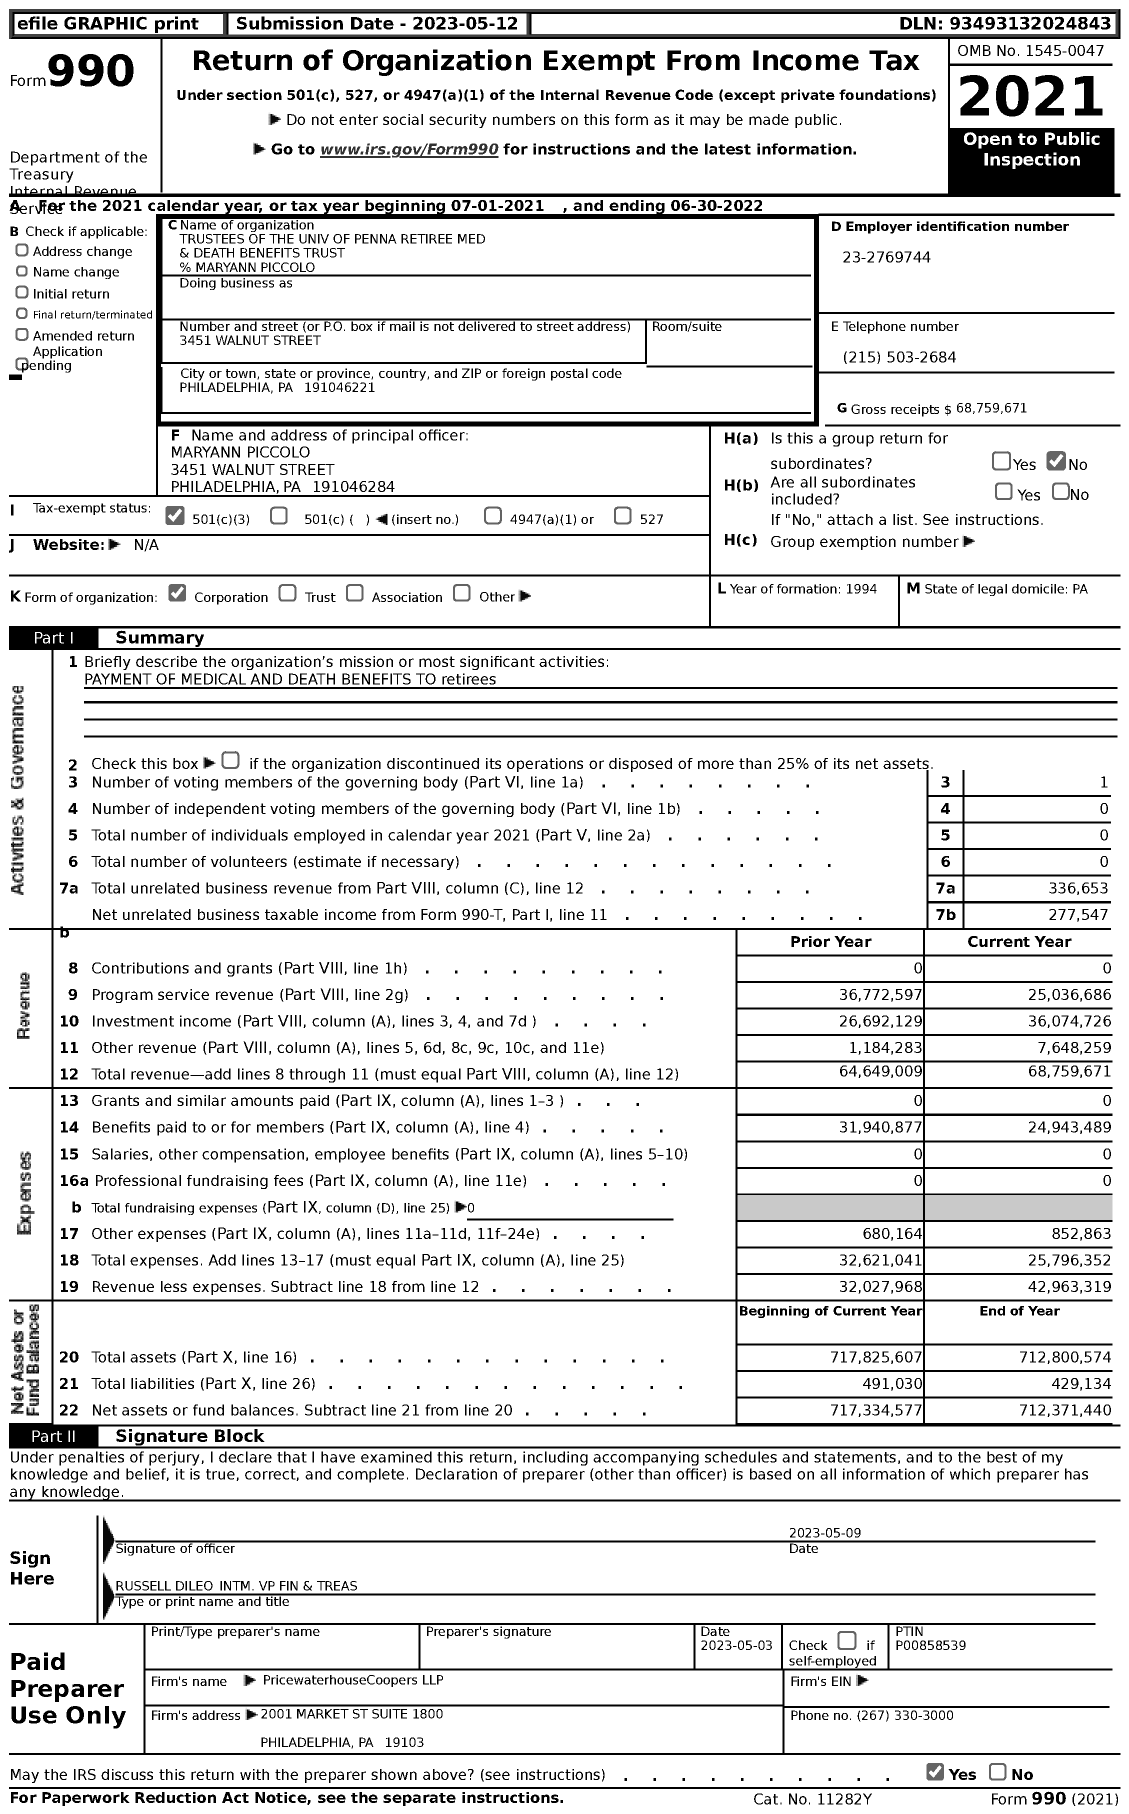 Image of first page of 2021 Form 990 for Trustees of the University of Pennsylvania Retiree Medical and Death Benefits Trust